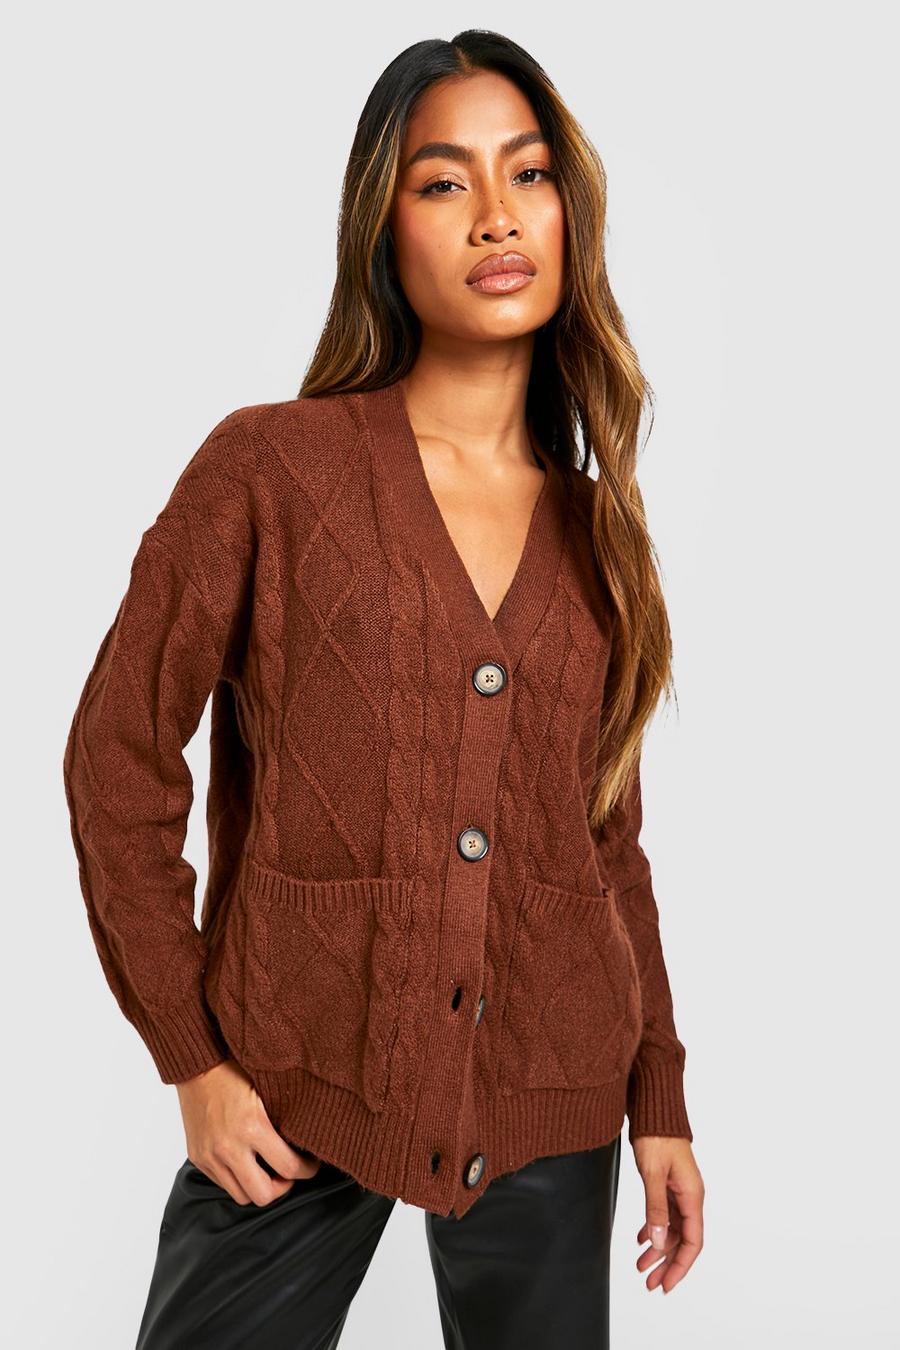 Brown Soft Knit Cable Slouchy Cardigan